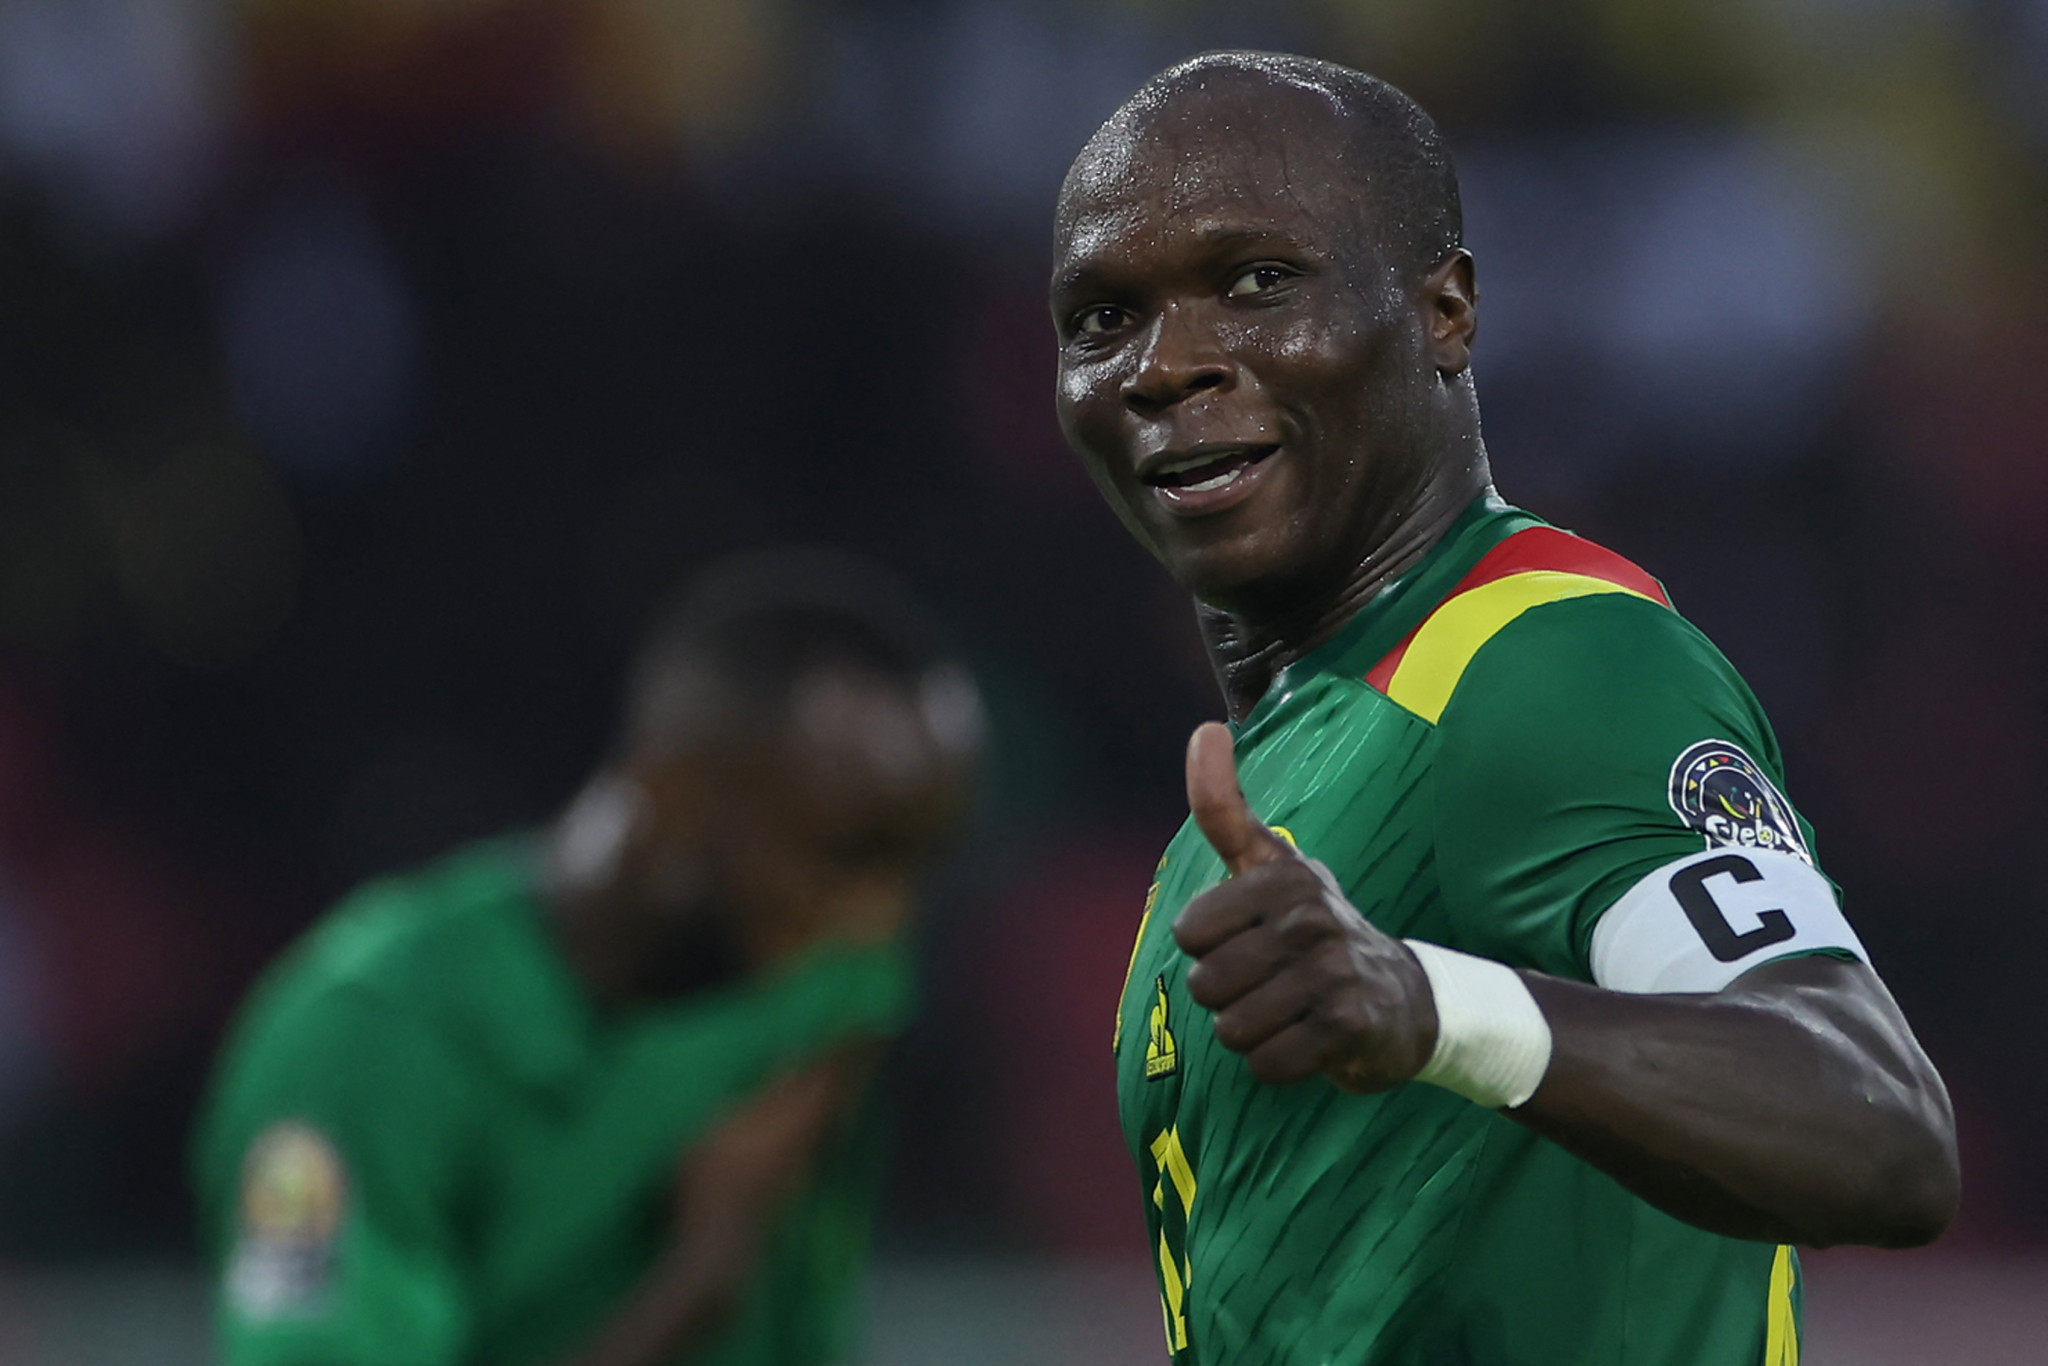 Aboubakar penalty double gives hosts Cameroon victory in Africa Cup of Nations opener